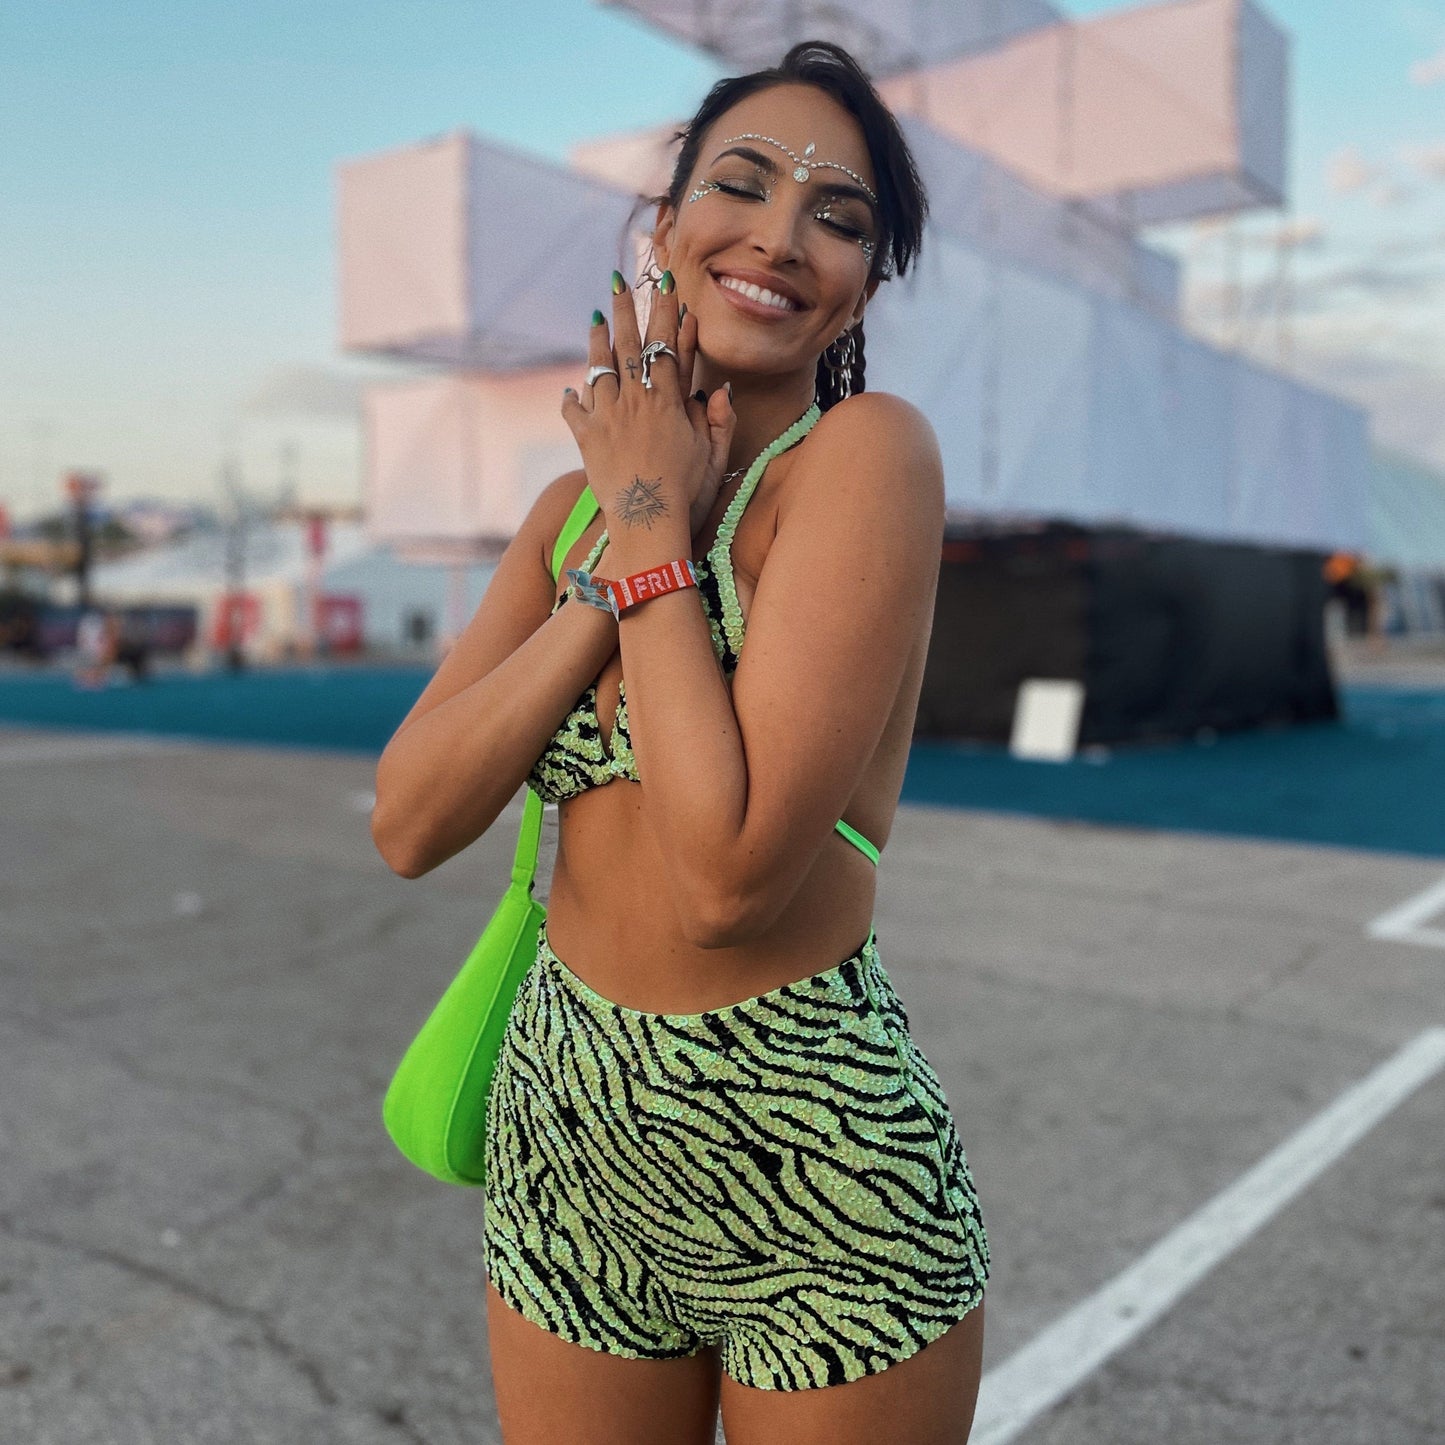 festival outfit with green and black zebra print matching set and green accessories, festival makeup and hairstyle